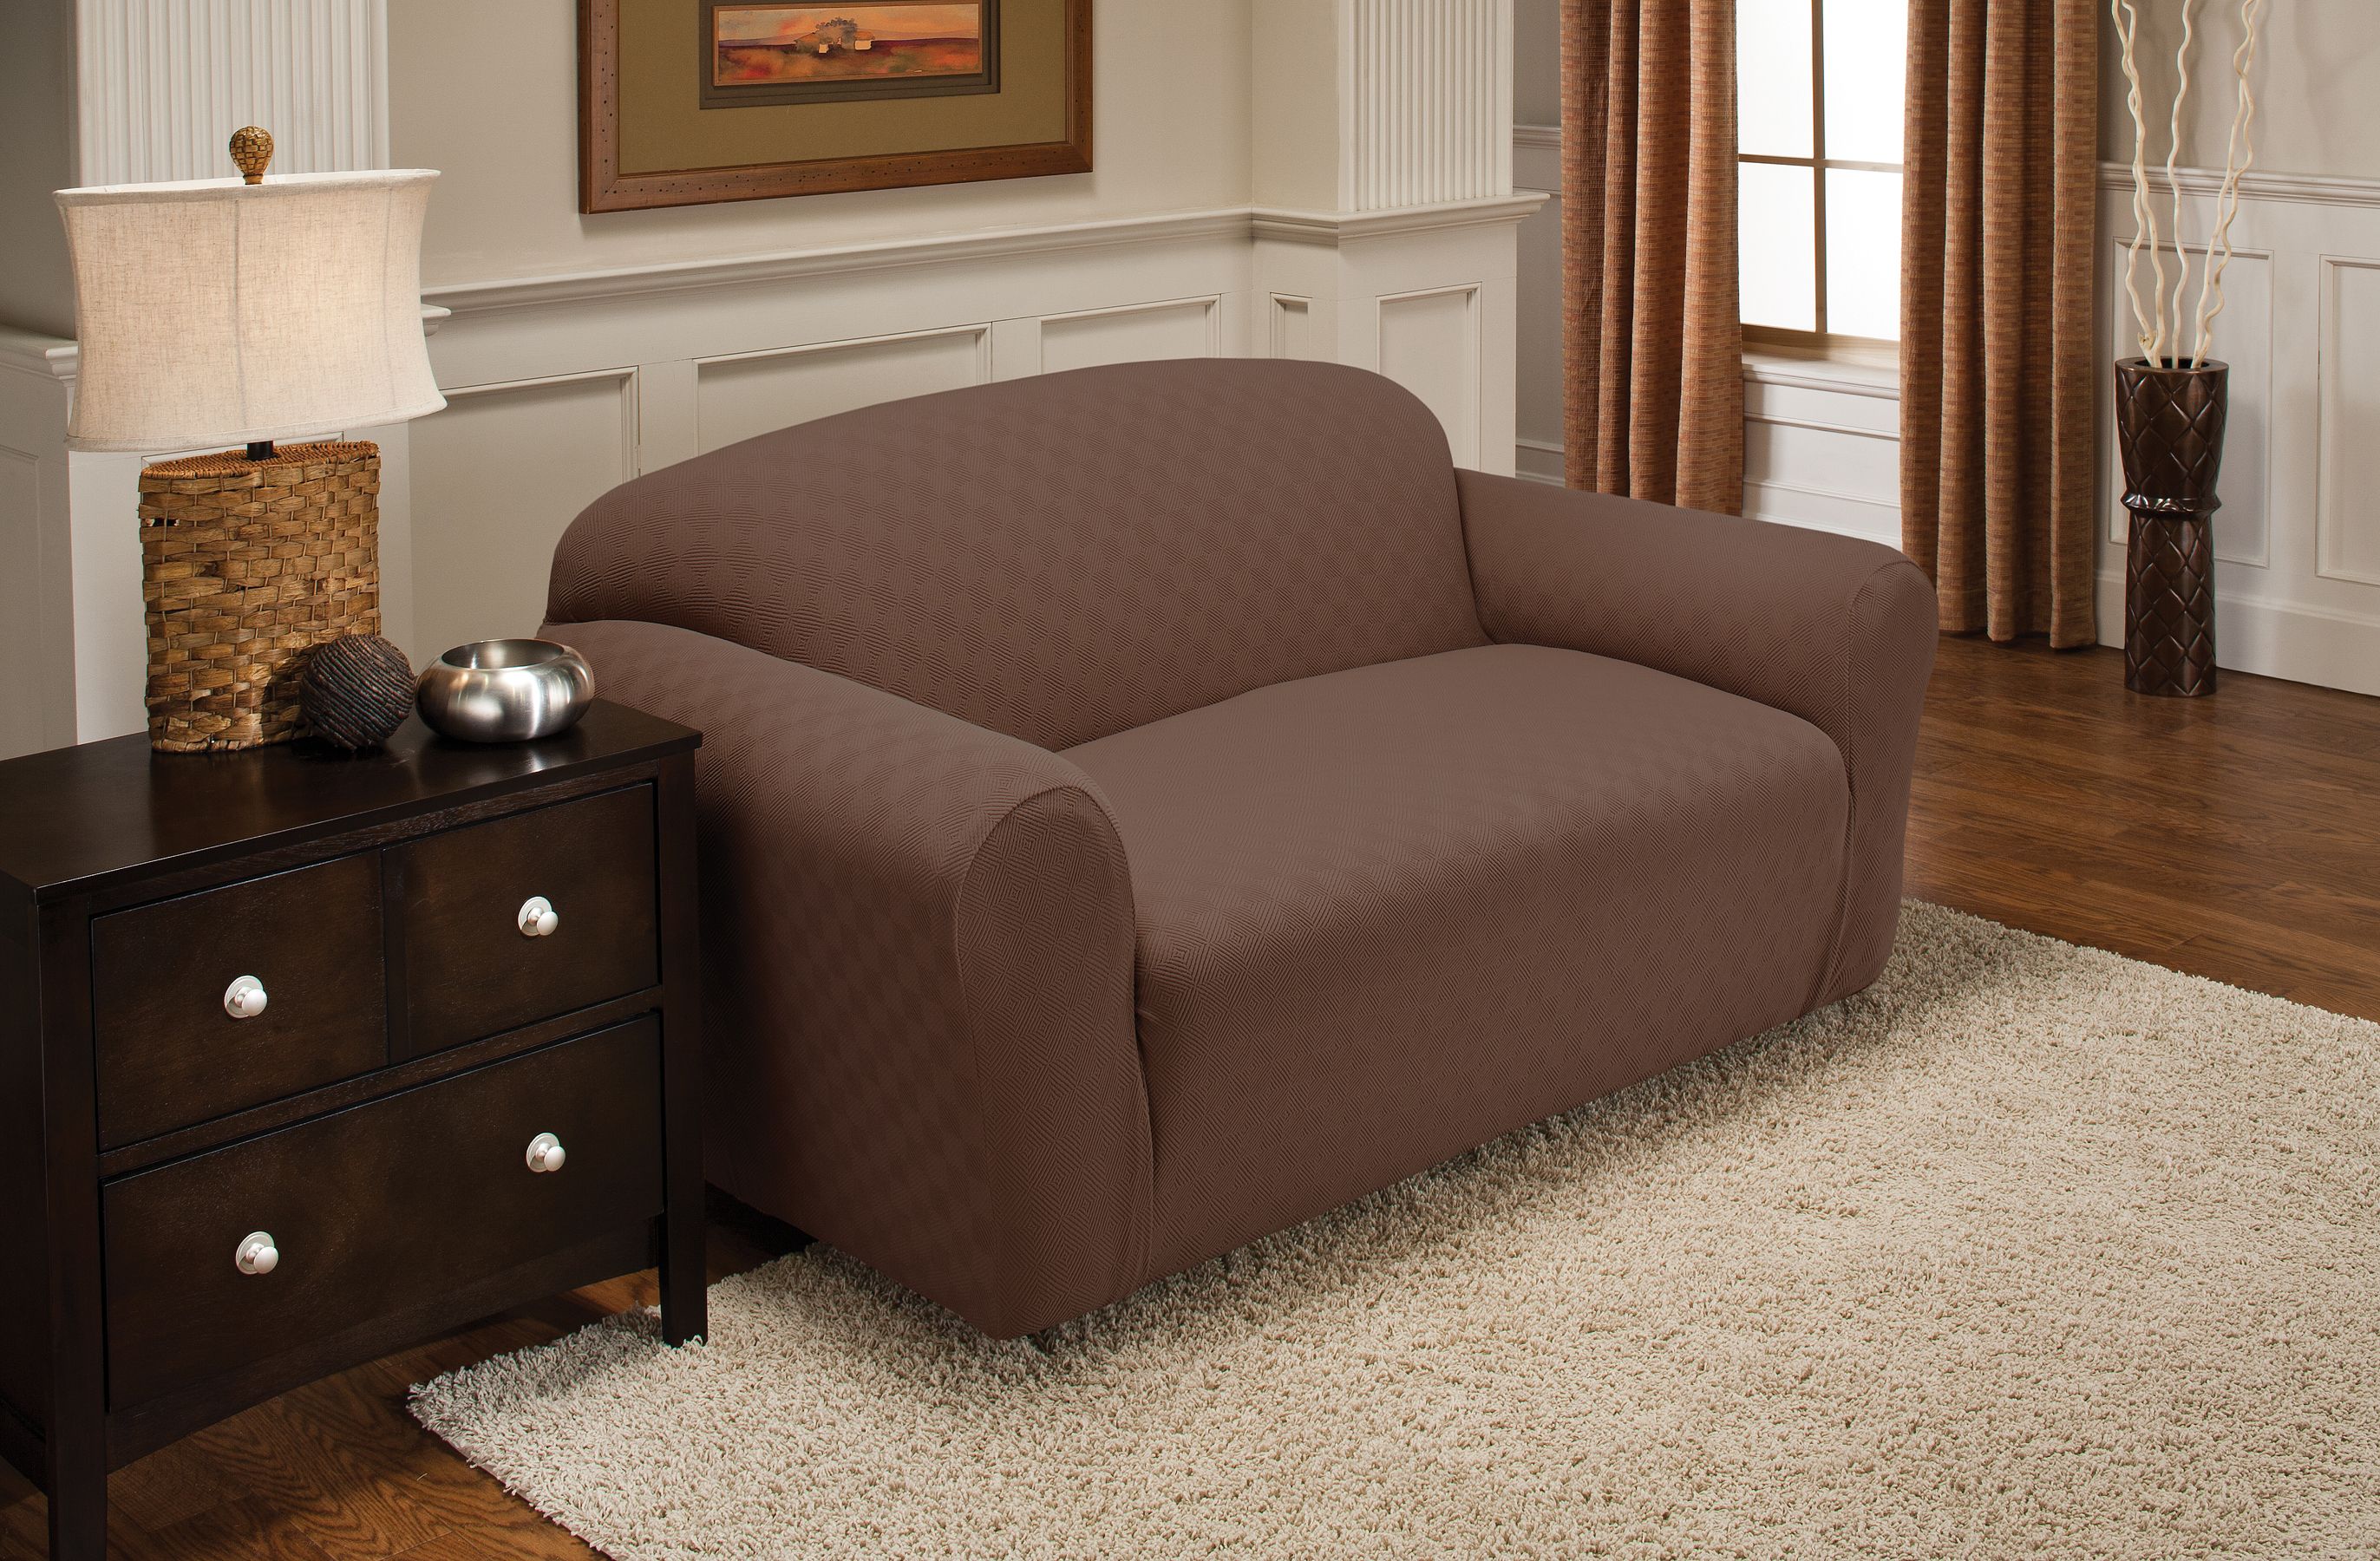 Stretch Sensations 1-Piece Stretch Newport Loveseat Slipcover, Cocoa - image 5 of 7